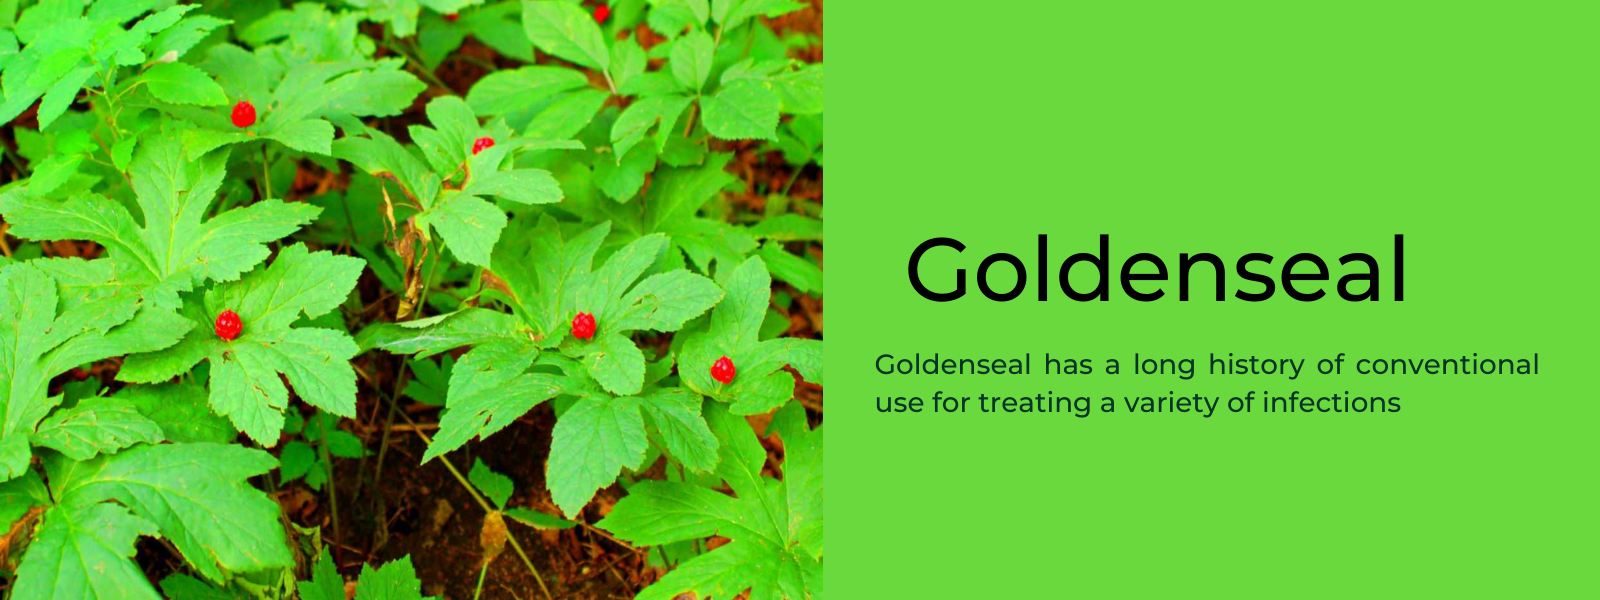 Goldenseal: Health Benefits, Uses and Important Facts